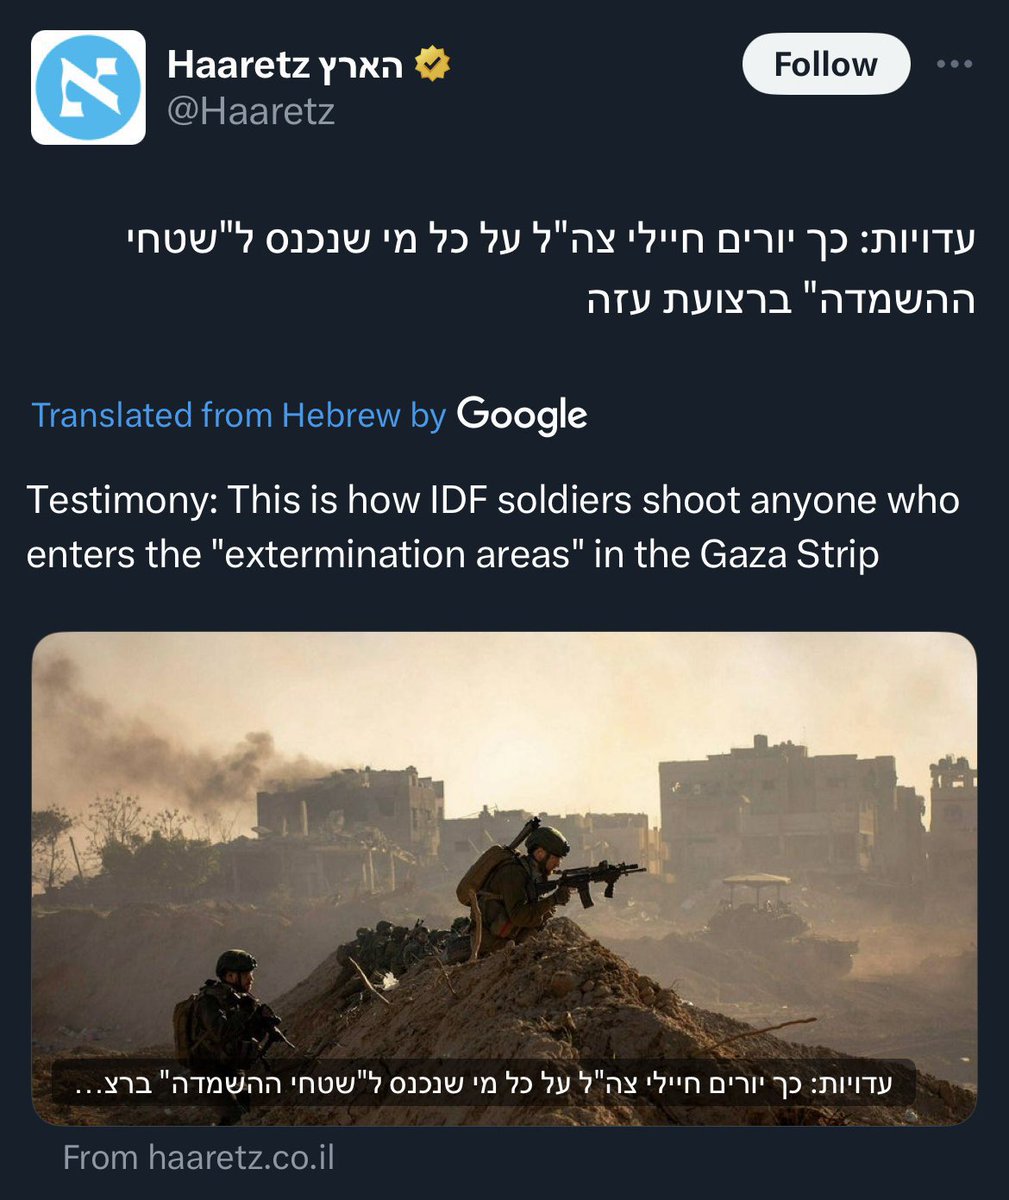 BREAKING: According to Haaretz, Israel has established “extermination zones” in Gaza where Israeli occupation soldiers are ordered to kill anything that moves: civilians, women, children, rescue and medical workers. Read that again. EXTERMINATION ZONES